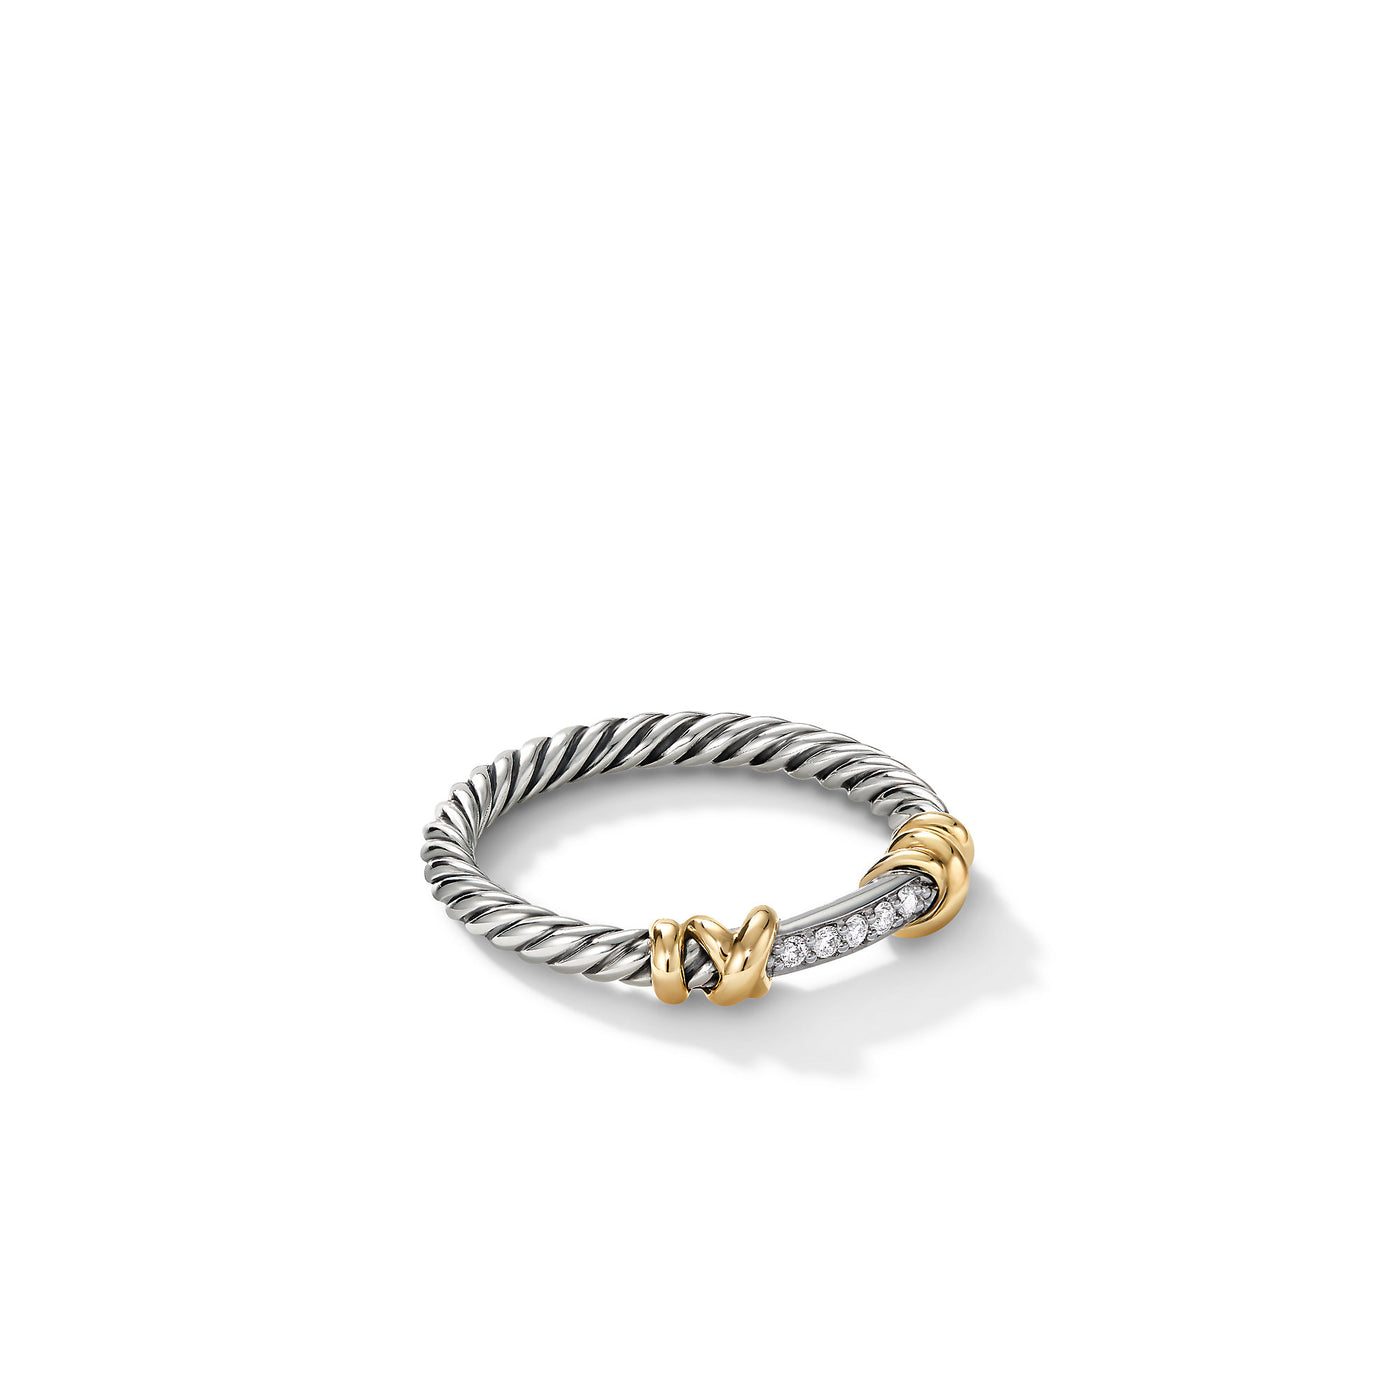 Petite Helena Wrap Band Ring in Sterling Silver with 18K Yellow Gold and Diamonds\, 4mm